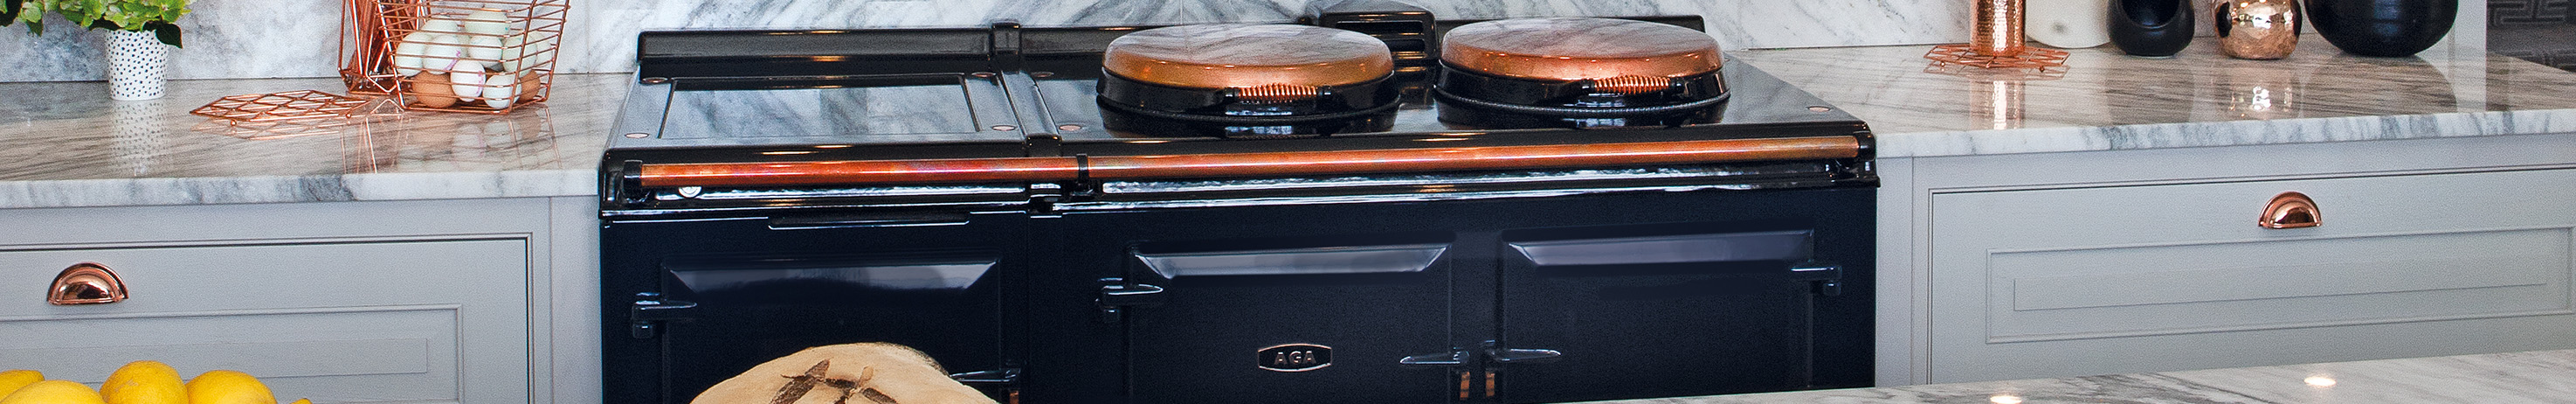 AGA x Taylor Howes Blue and Copper AGA